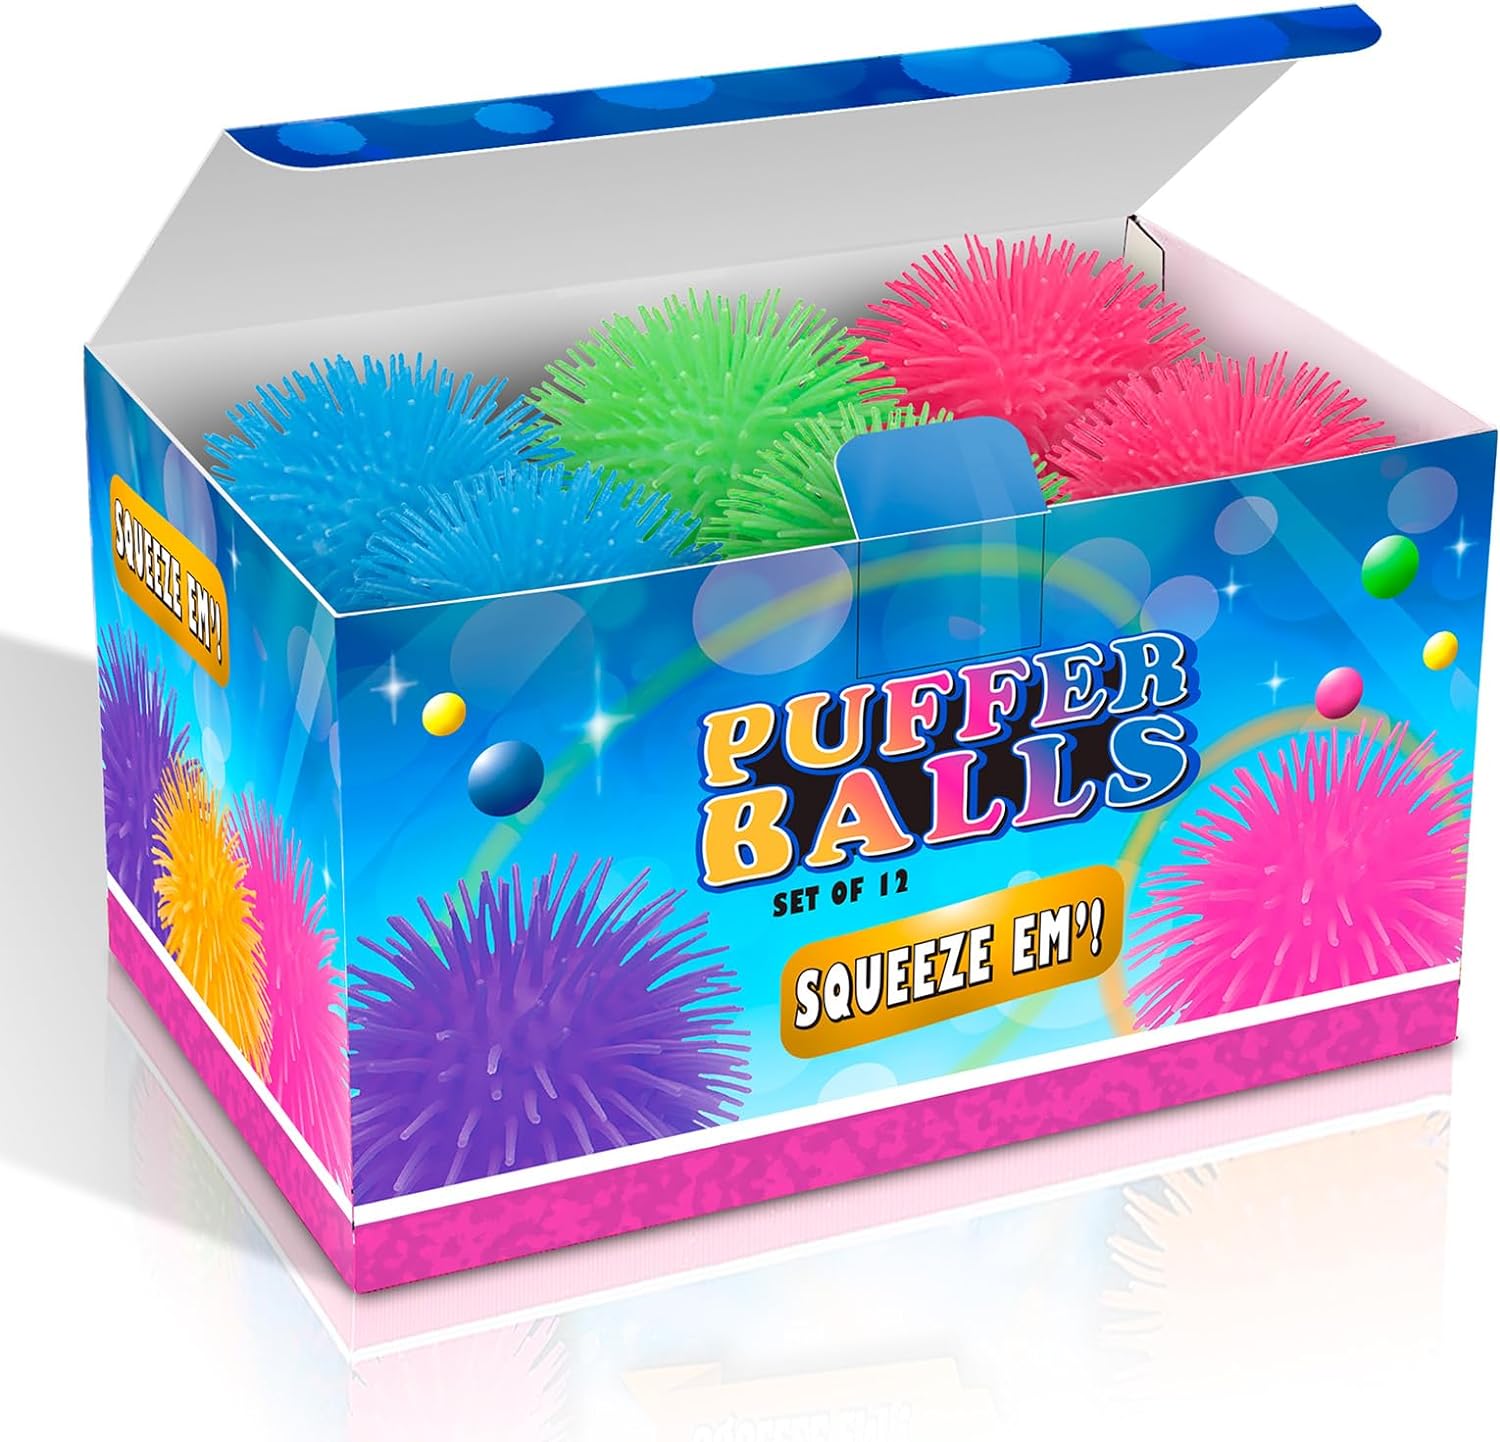 ArtCreativity Puffer Balls - Pack of 12 - Spiky, Soft and Squeeze Stress Relief Balls for Kids and Adults - Calming Sensory Balls for Autistic Children, Birthday Party Favors for Boys and Girls